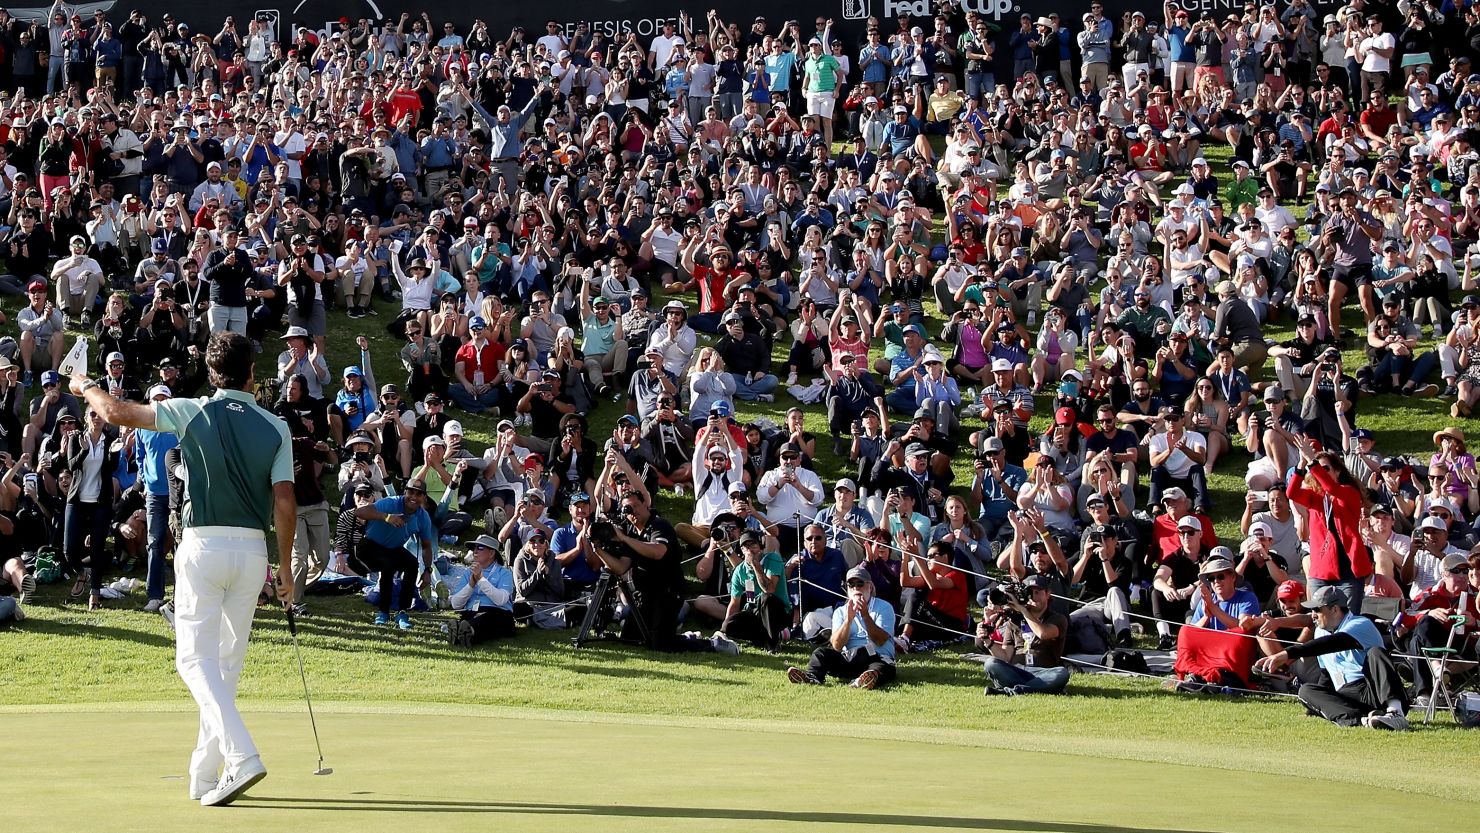 Bubba Watson salutes the crowd after winning the Genesis Open at Riviera Country Club.